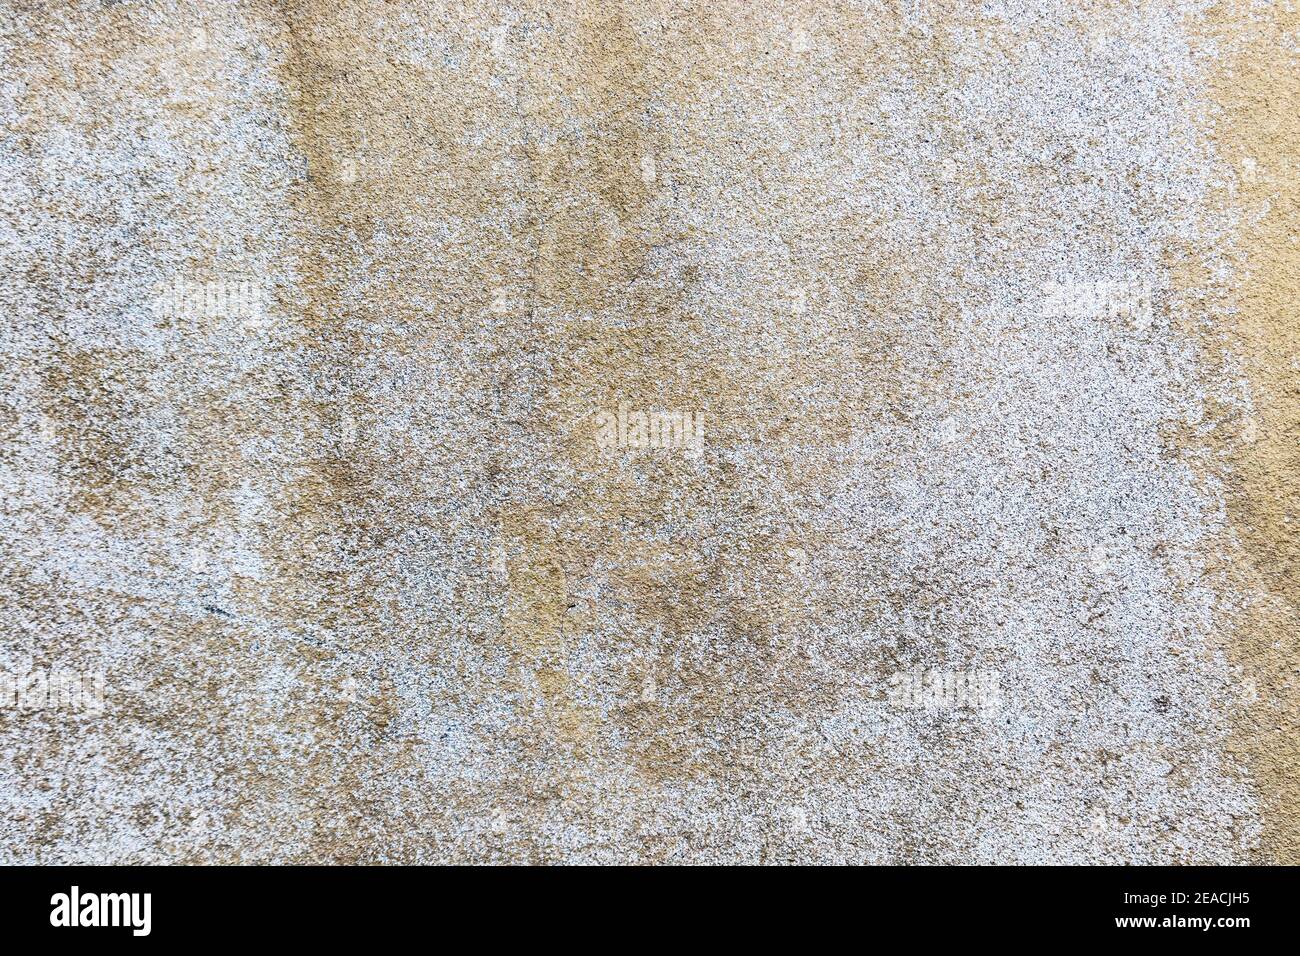 Th elements created various discoloration on a once white, stone wall to turn it into a perfect grungy background. Stock Photo